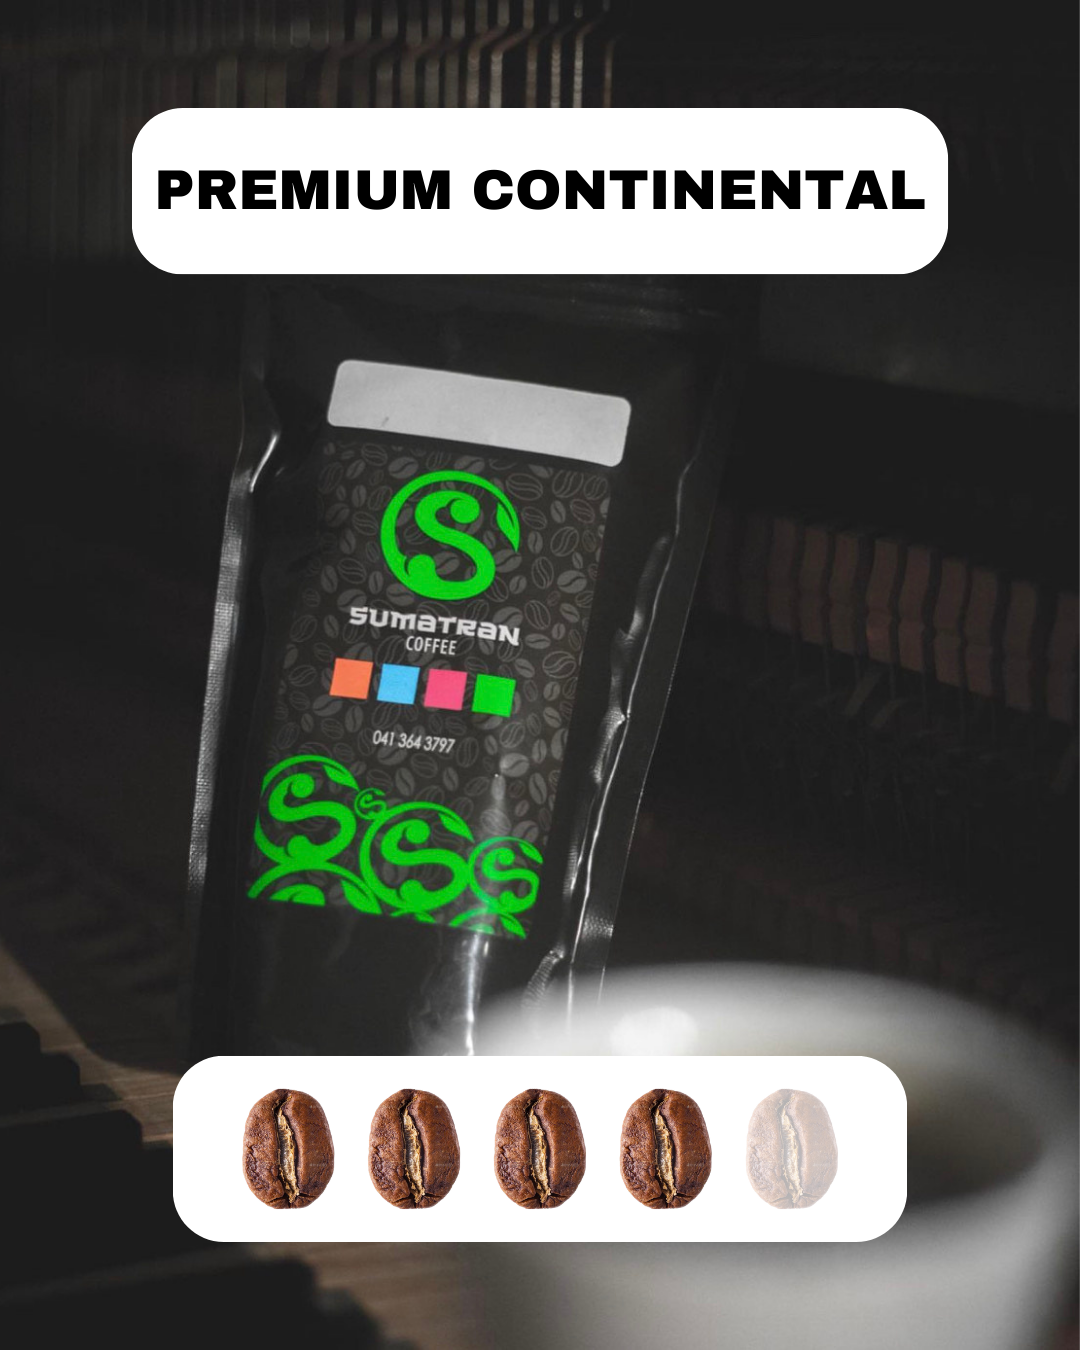 Our Premium Continental coffee blend